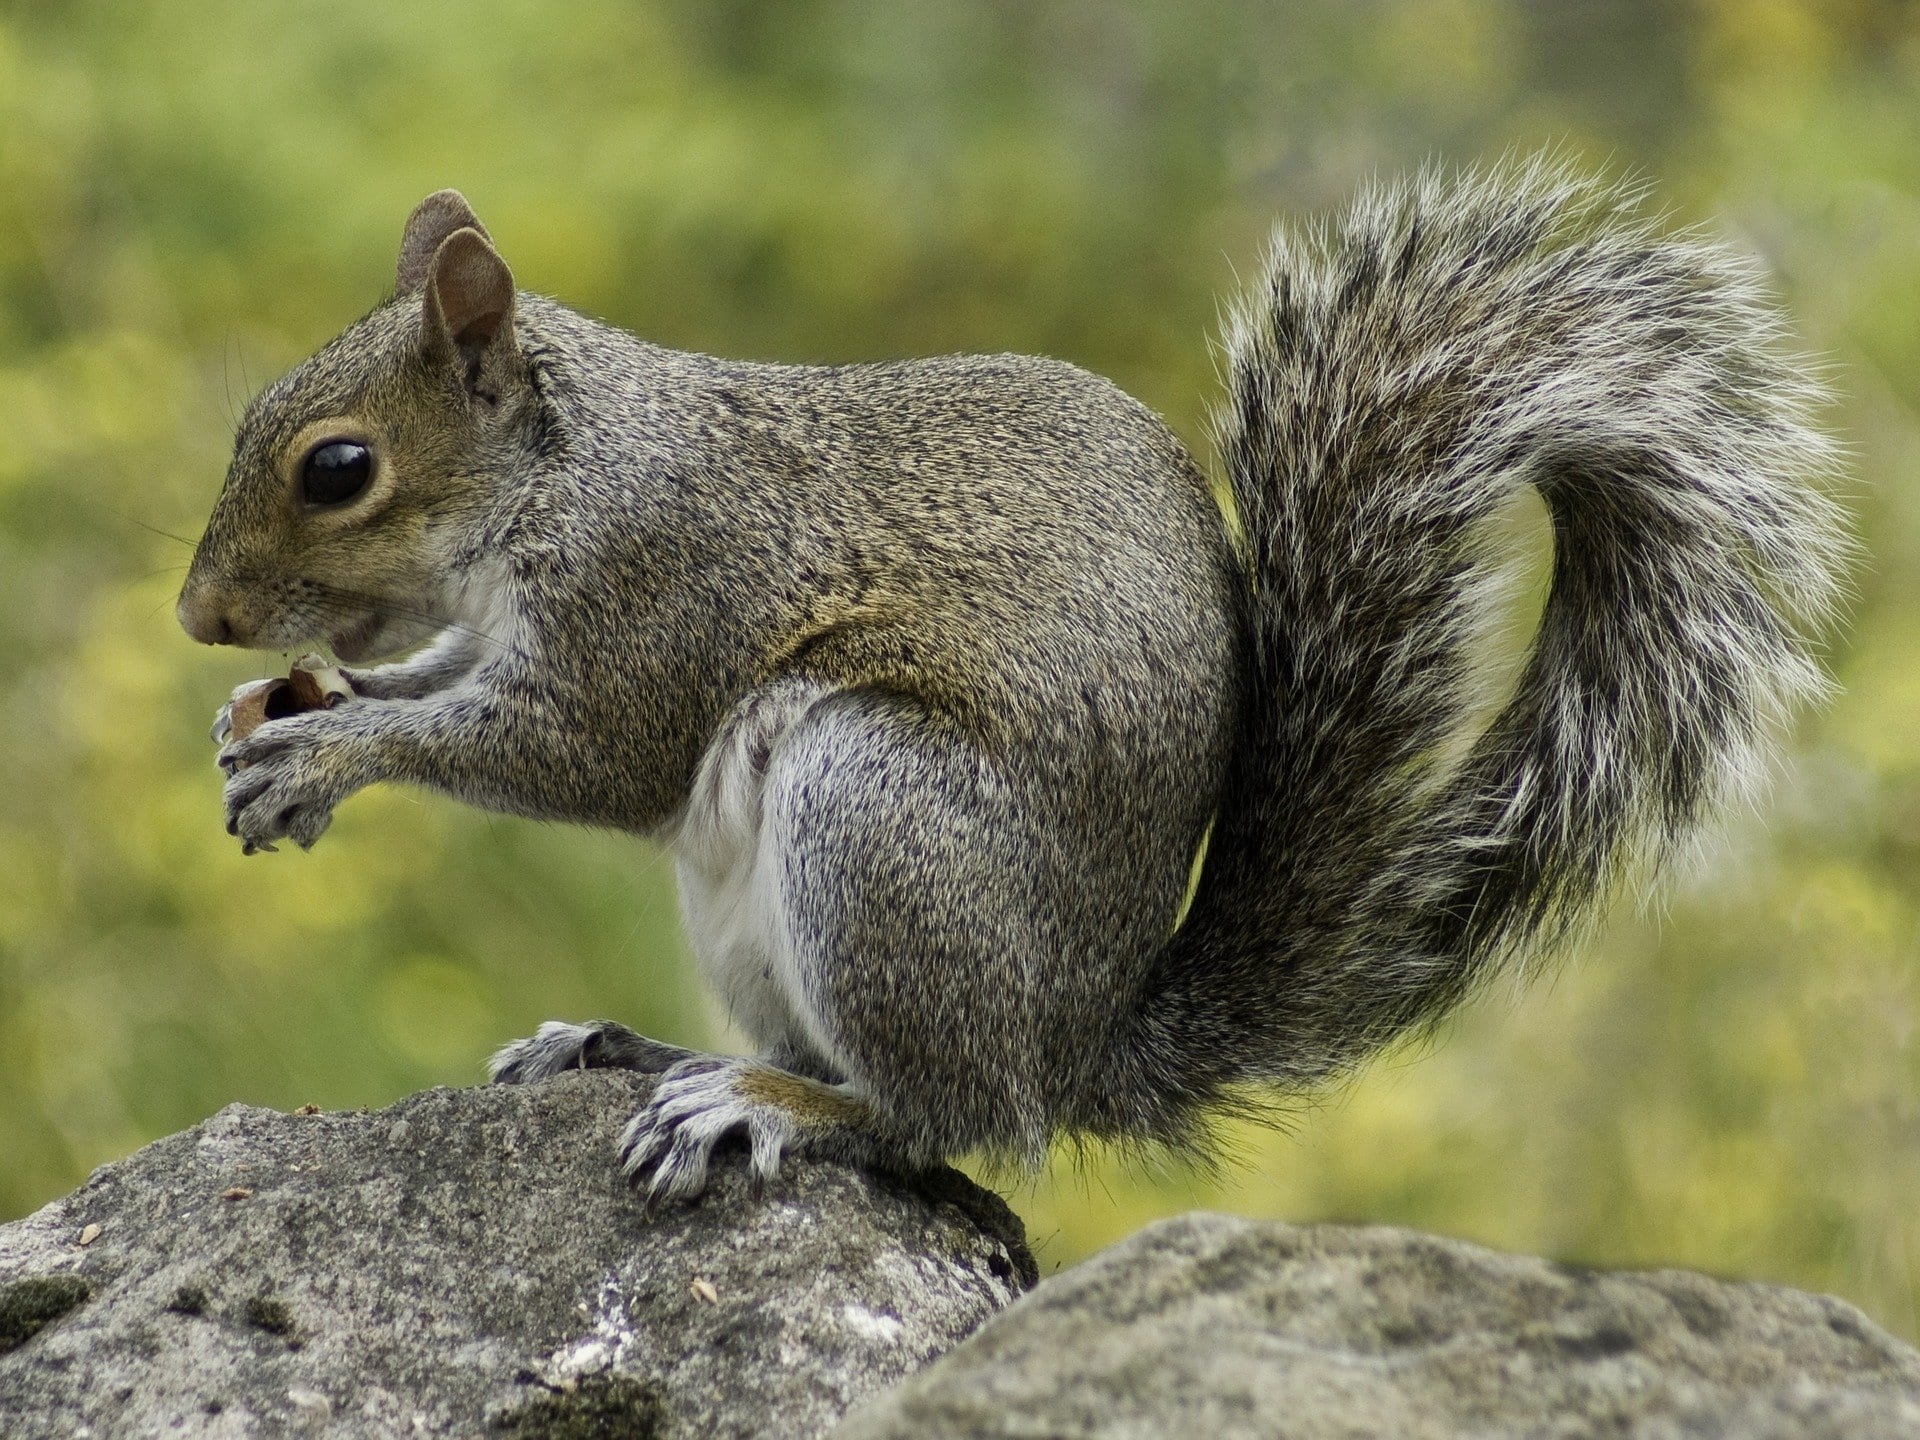 5 Signs You May Have Squirrels in Your Attic